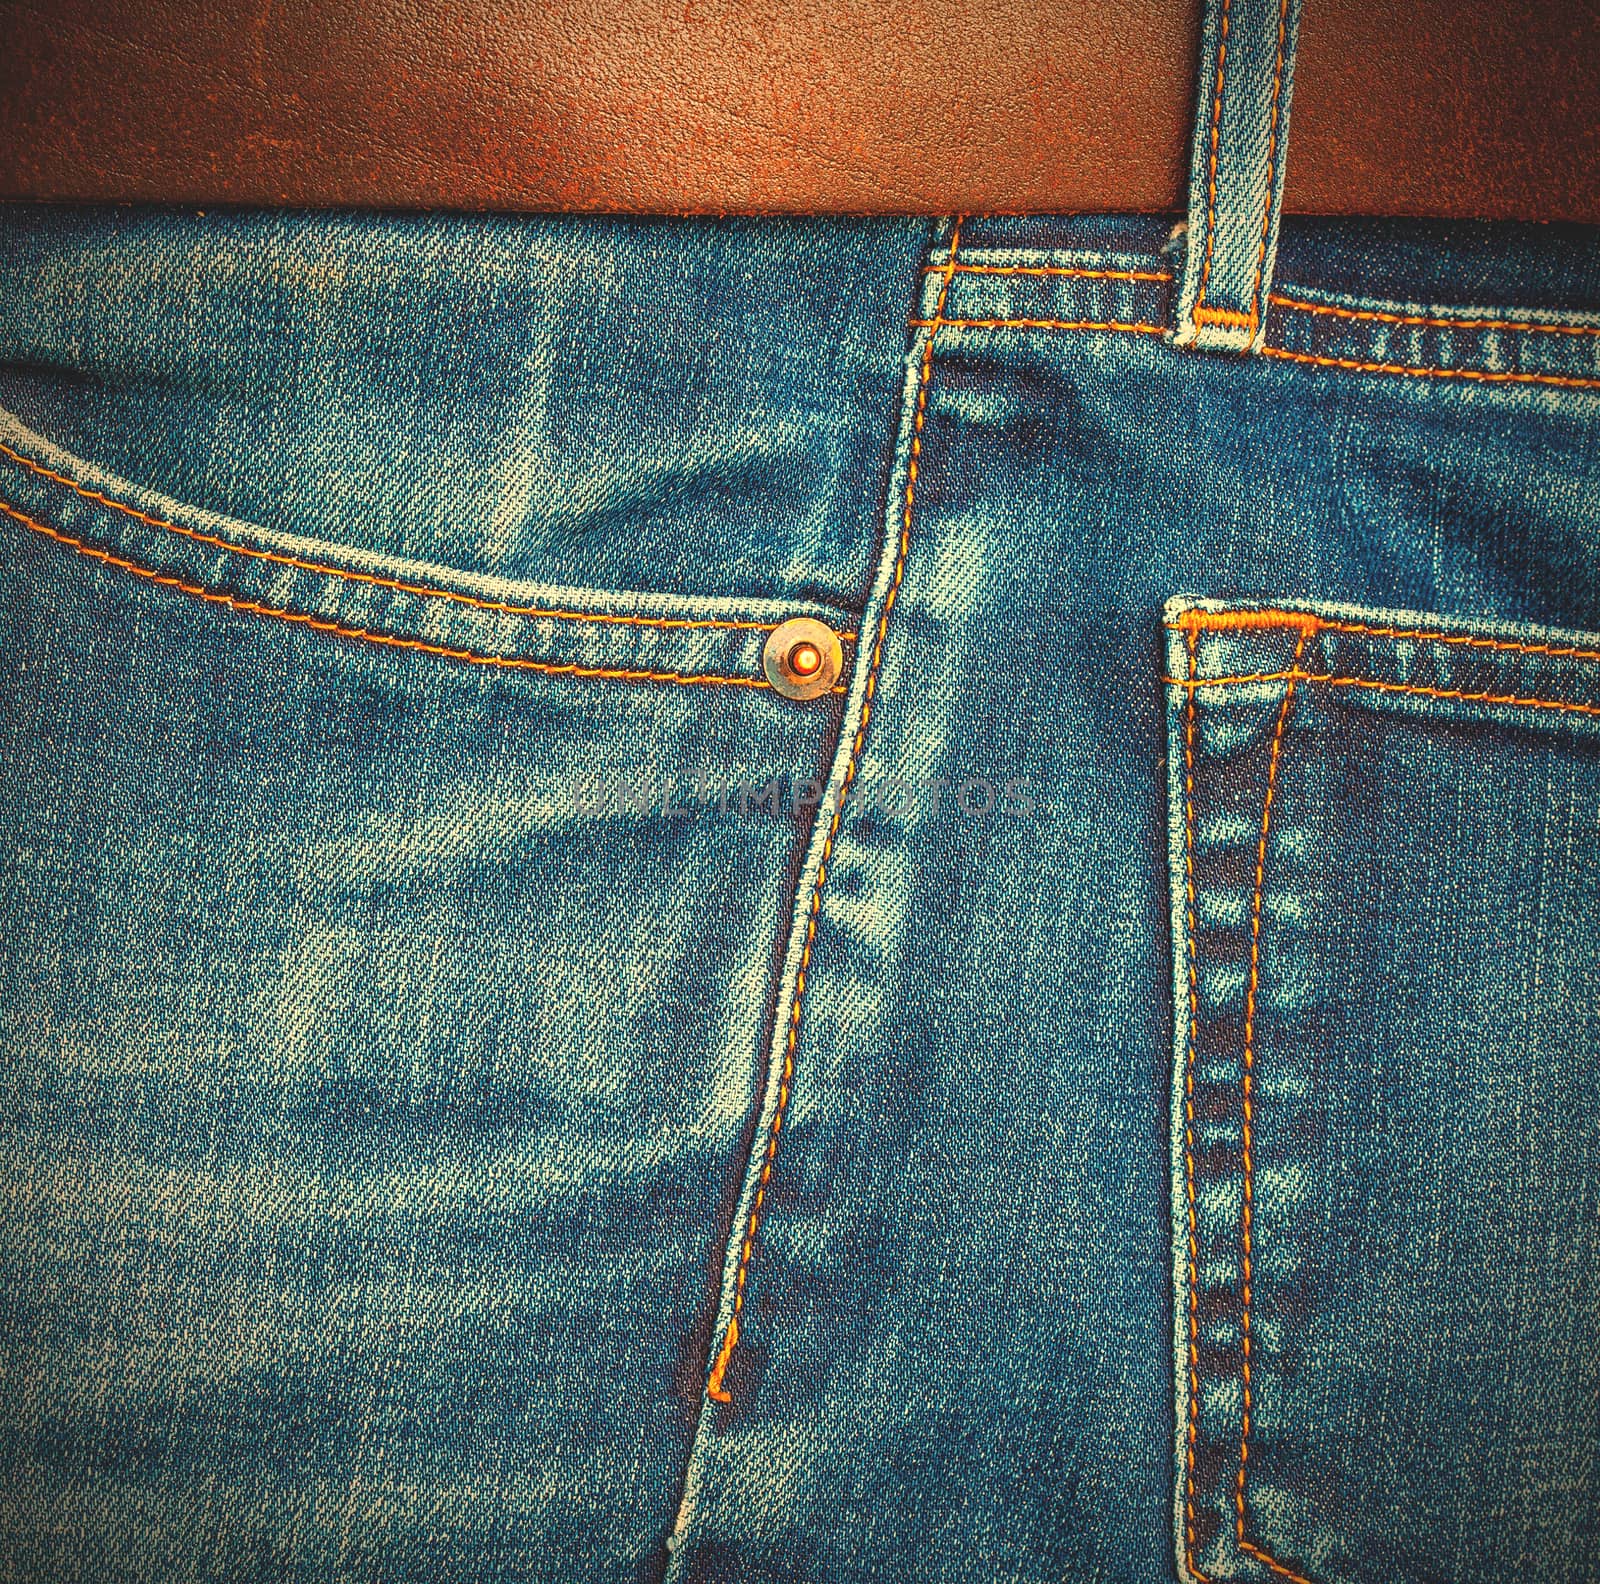 jeans with a brown leather belt, side view. instagram image style